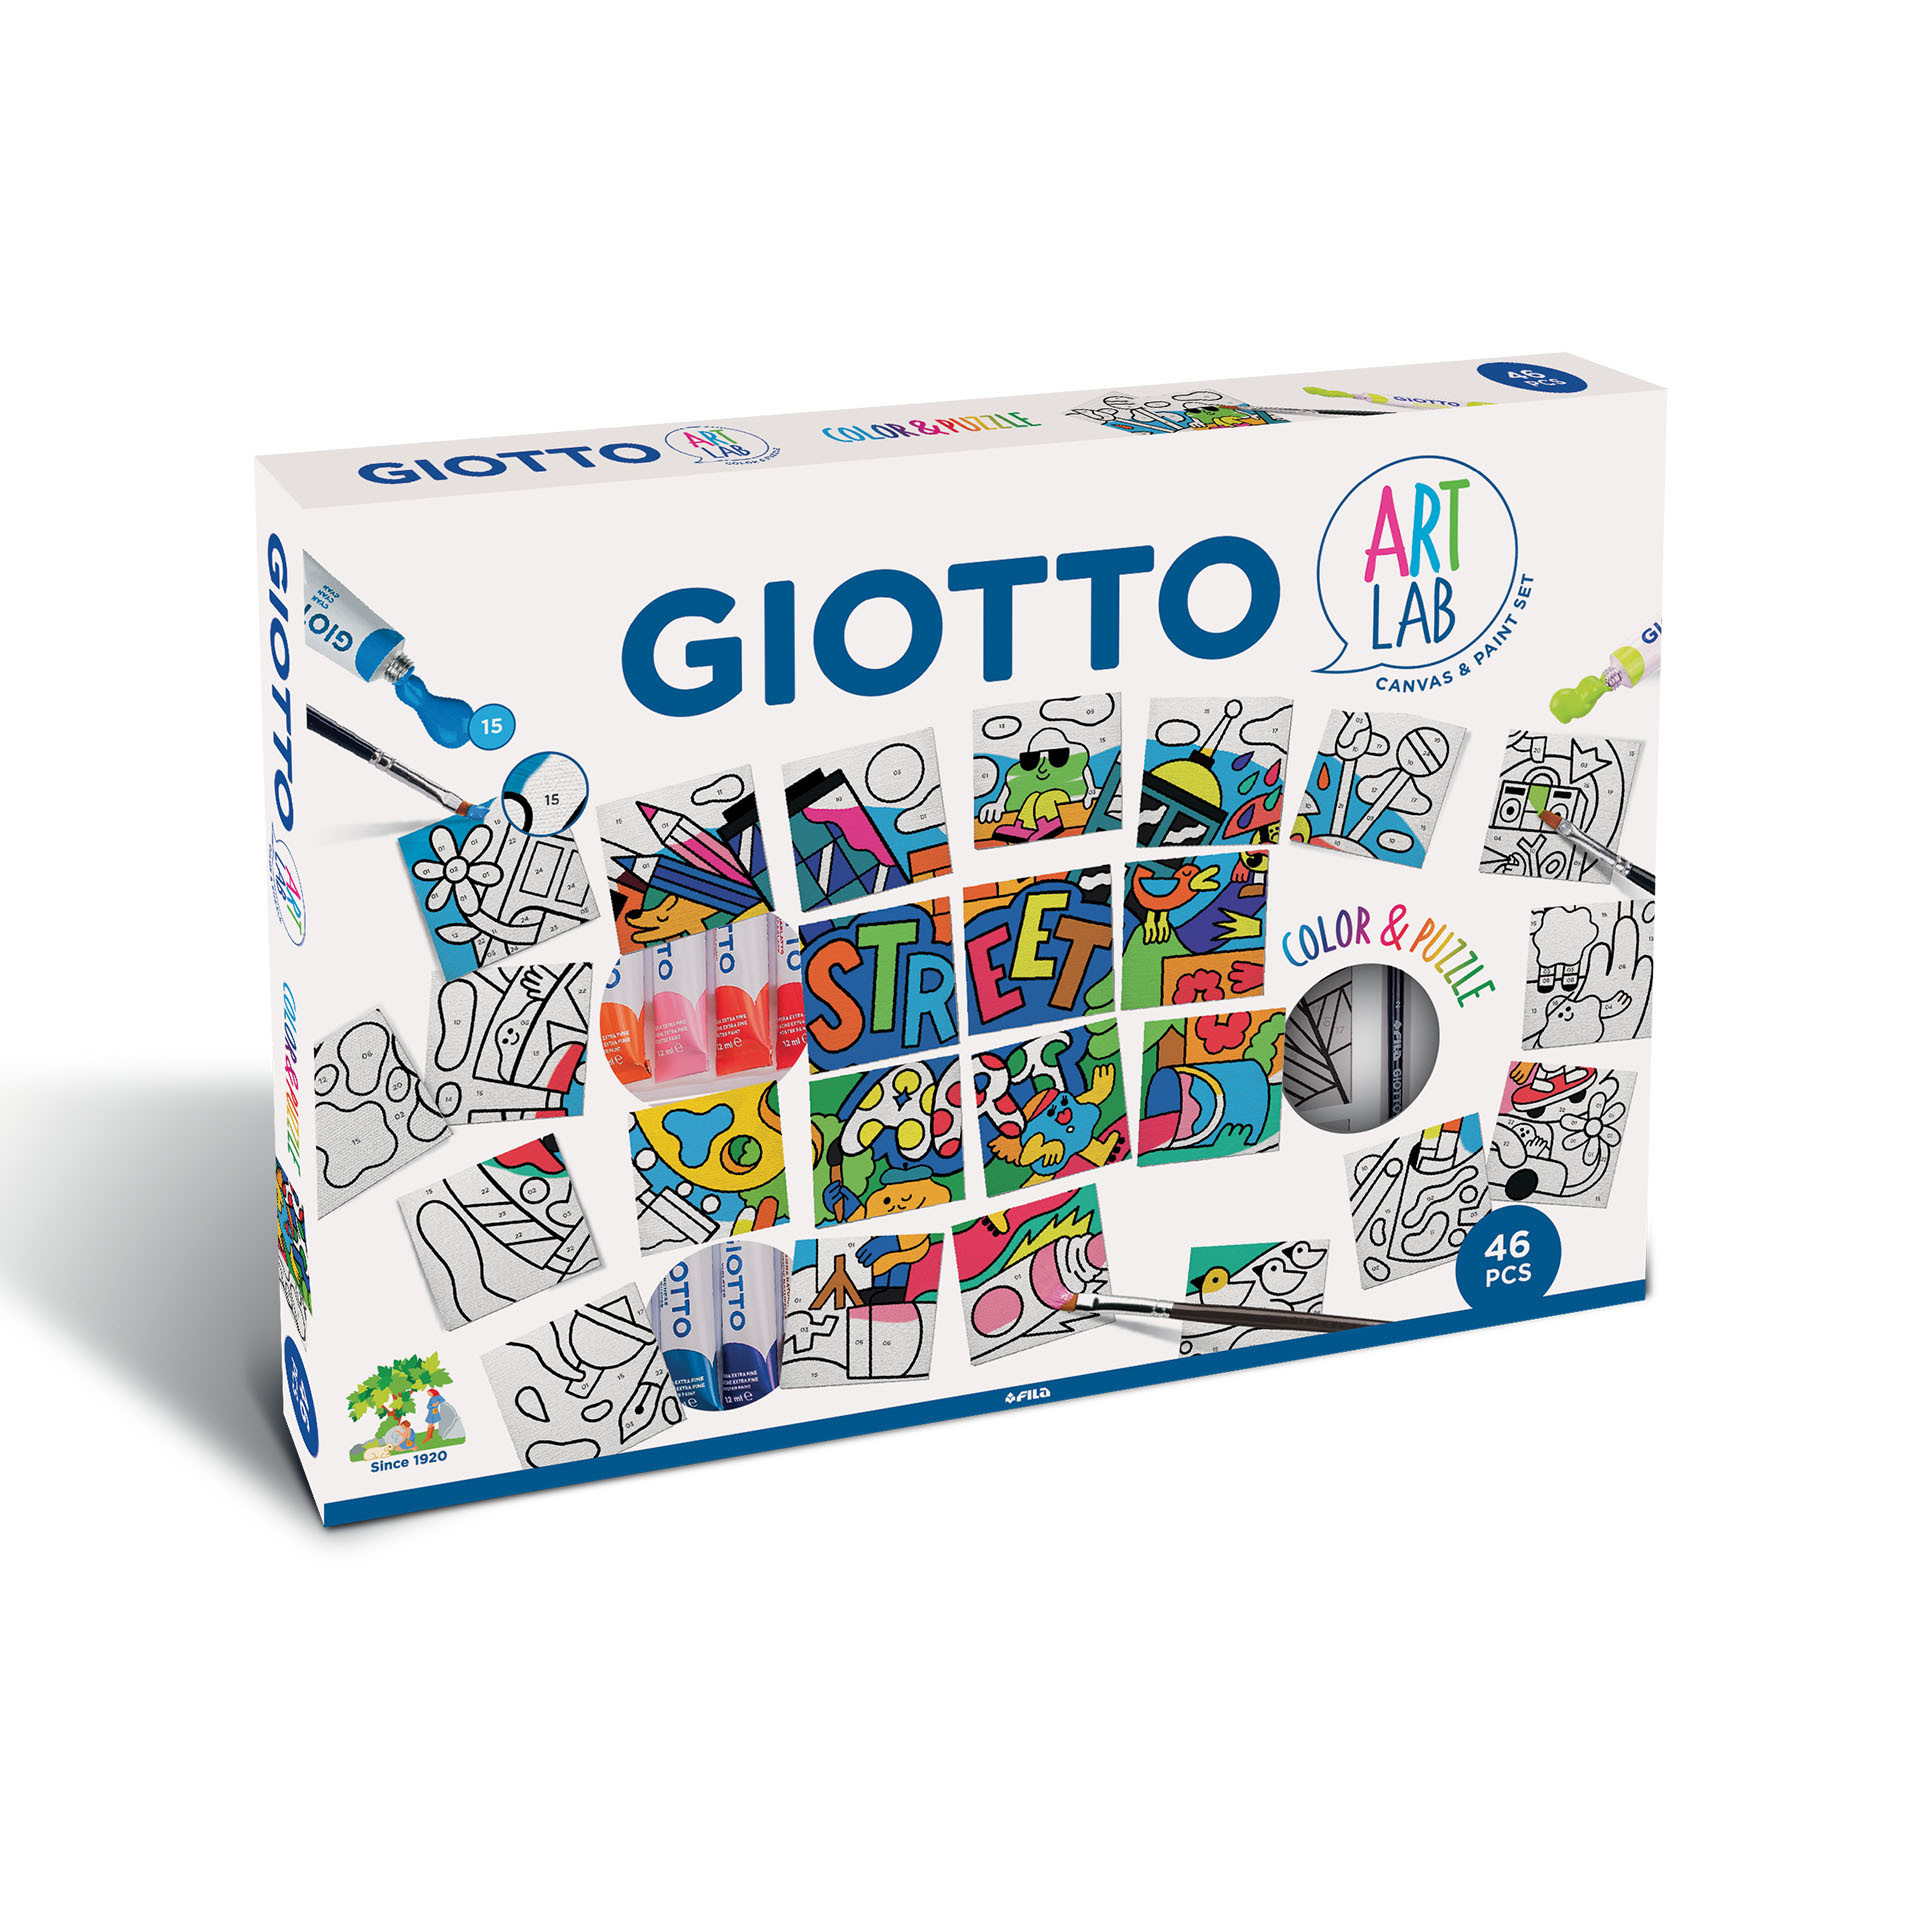 Giotto Art Lab Colors&Puzzle, , large